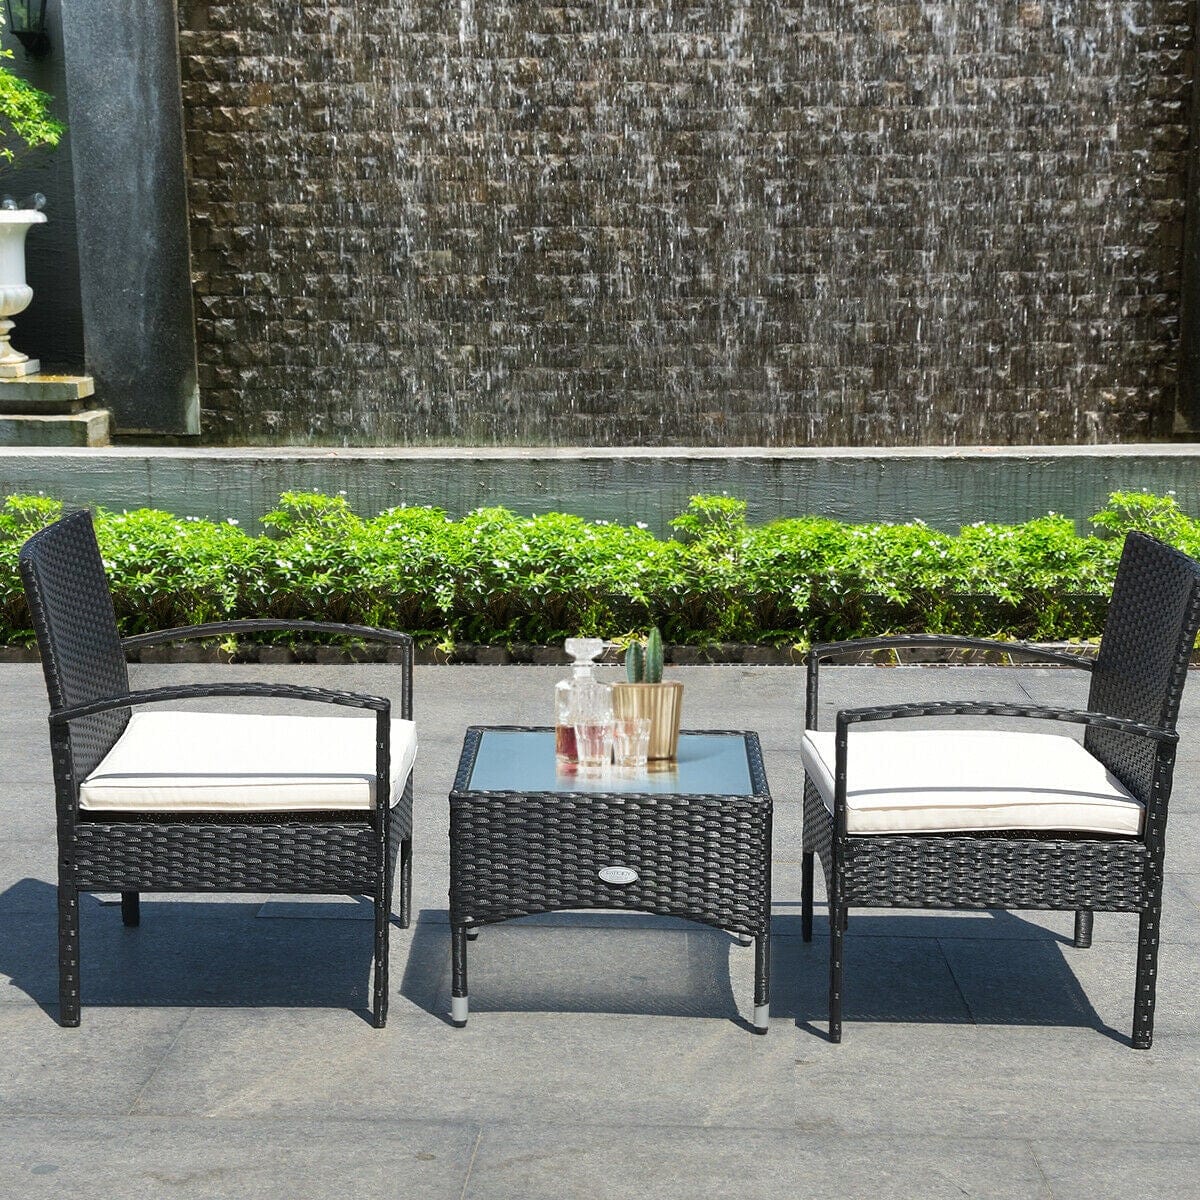 Dreamline Outdoor Garden/Balcony Patio Seating Set 1+2, 2 Square Shaped Chairs And Table Set (Black)